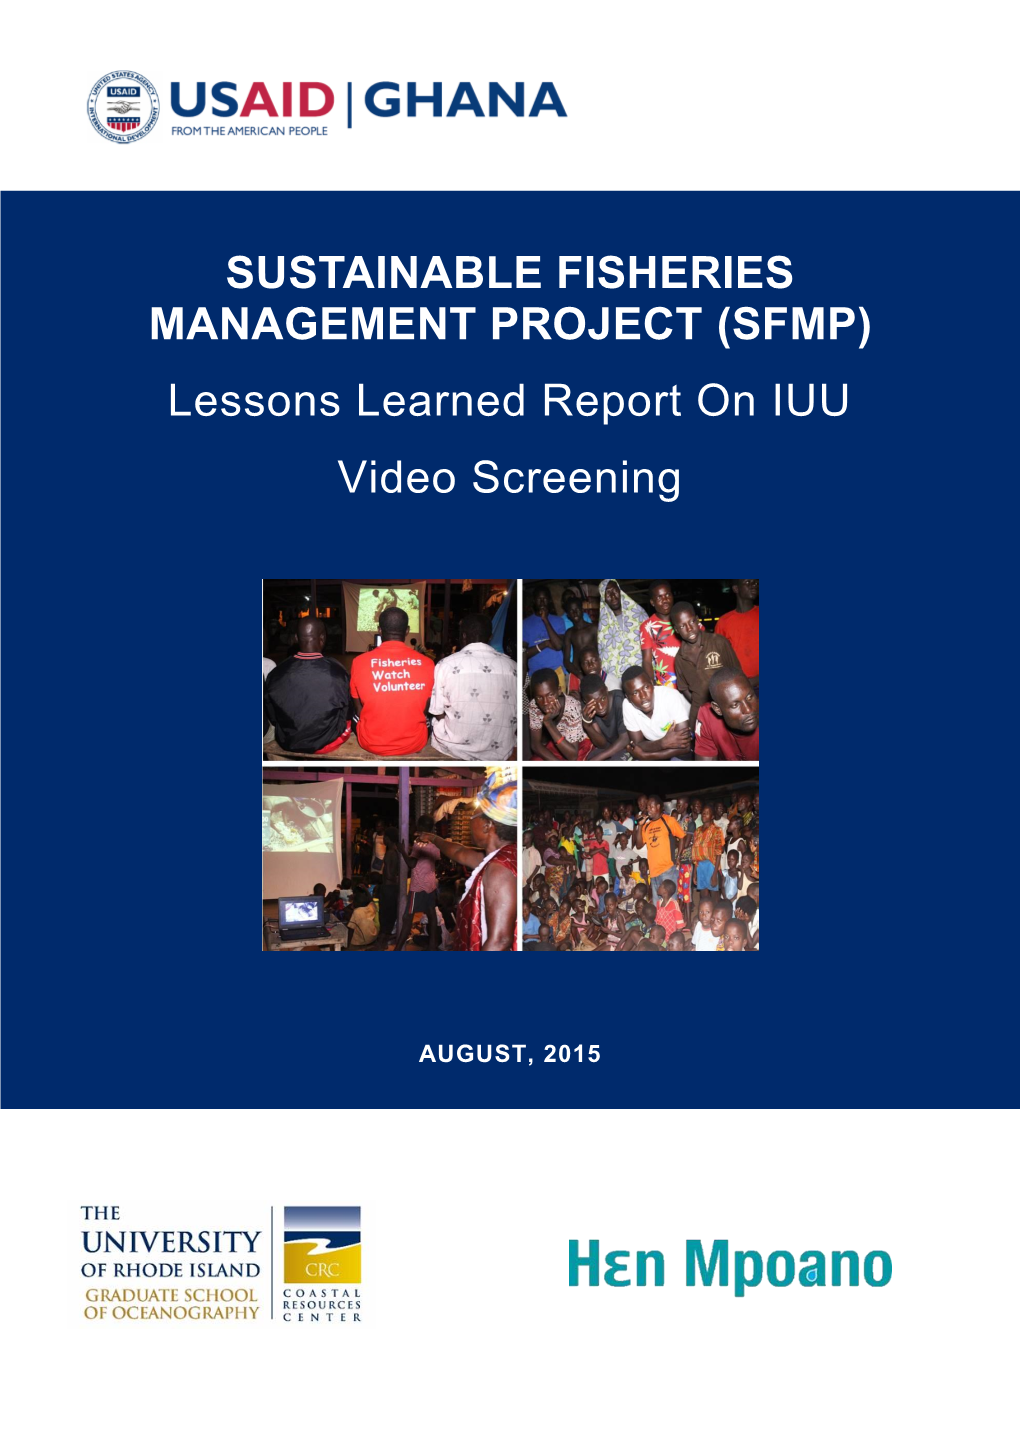 Lessons Learned Report on IUU Video Screening